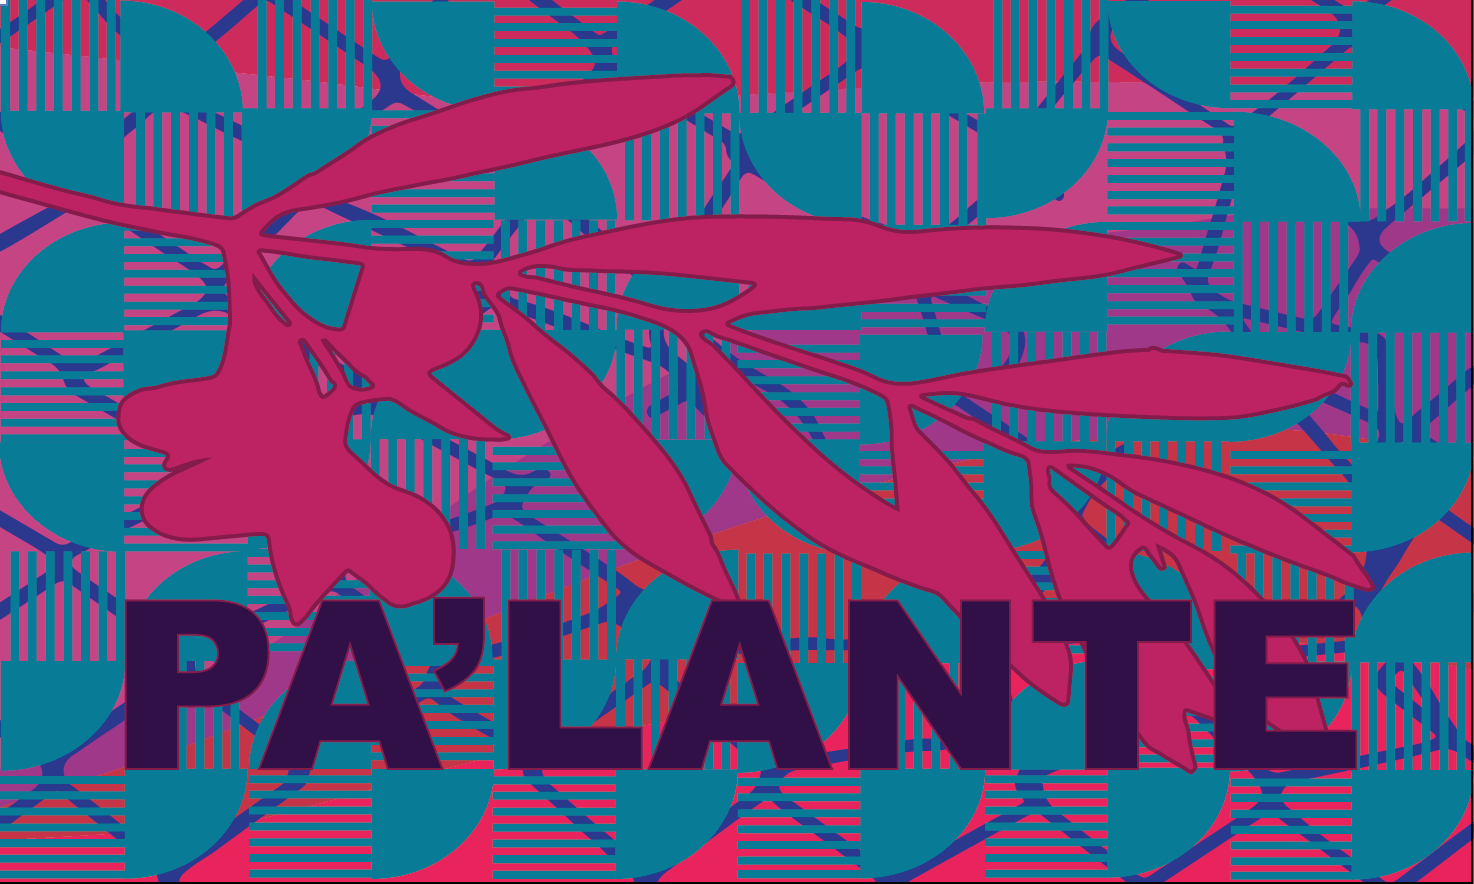 Bold patterns and vivid colors supply the background for the word pa’lante—meaning “go for it,” formed by a conjunction of the words para and adelante.